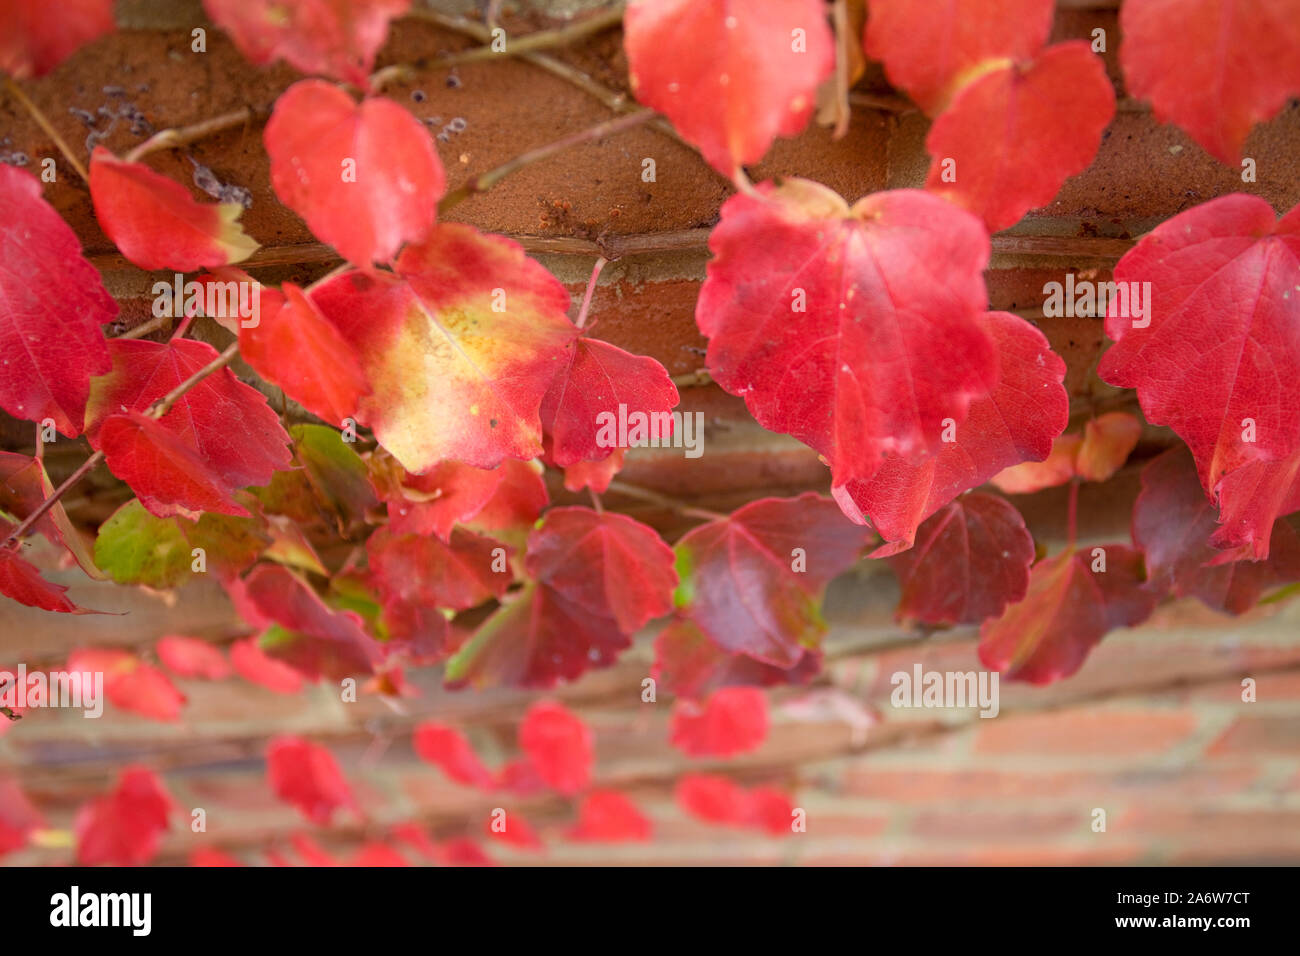 Virginia creeper plant attached to house Stock Photo